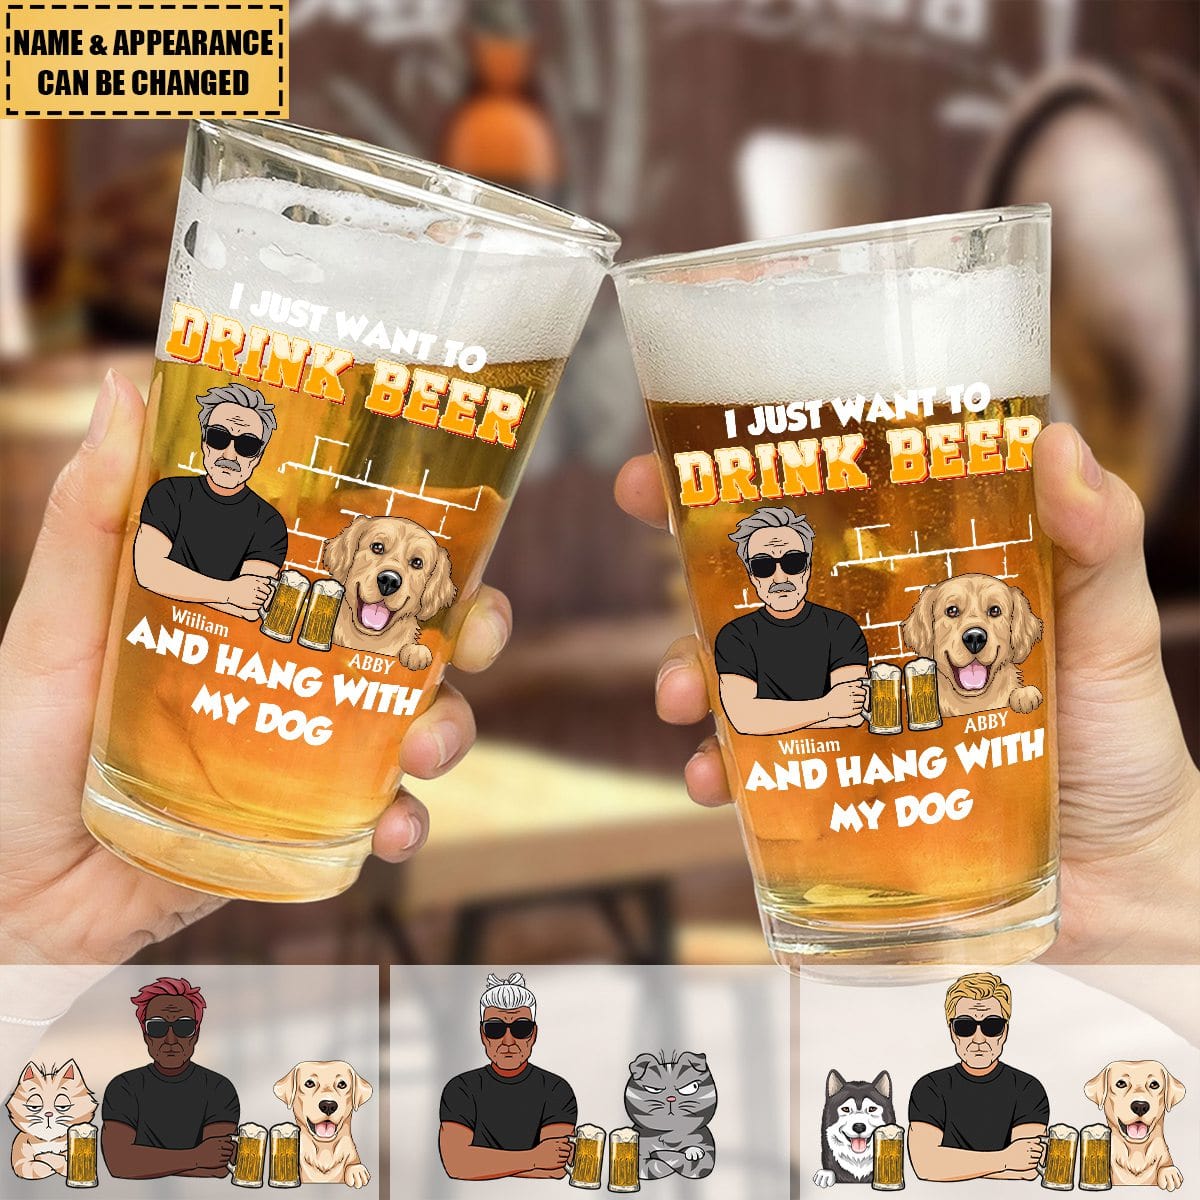 I Just Want To Drink Beer And Hang With My Dogs - Personalized Beer Glass